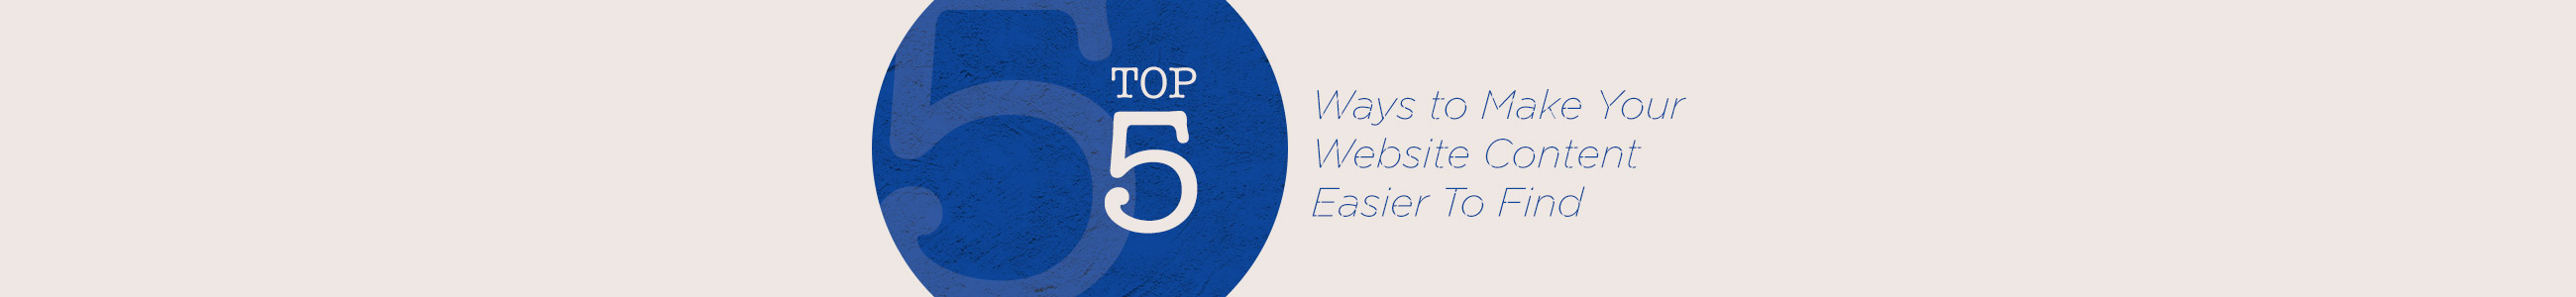 Top 5 Ways to Make Your Website Content Easier To Find